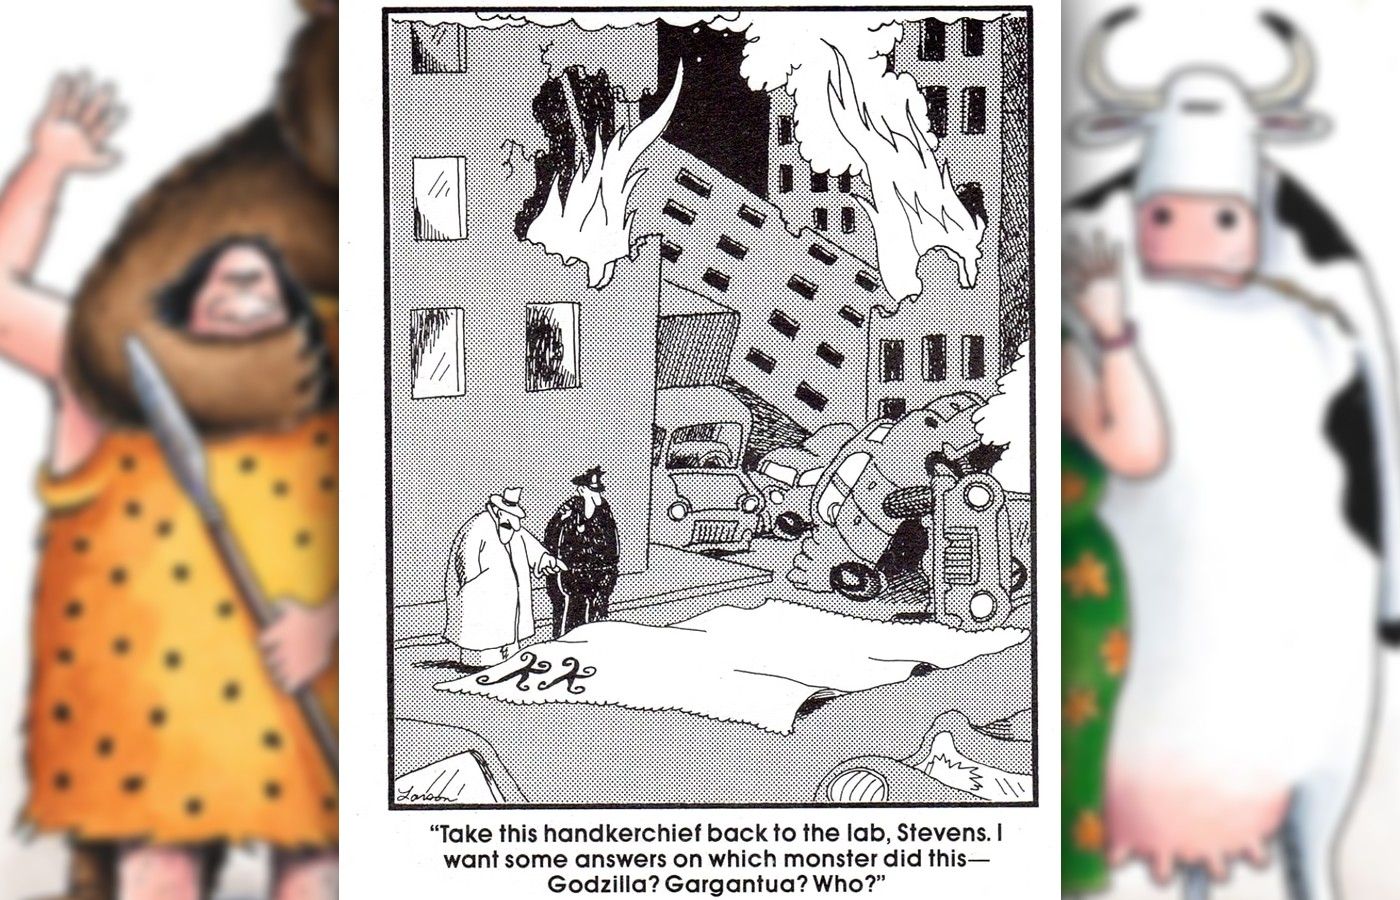 far side comic where king kong left his handerchief in the destroyed city